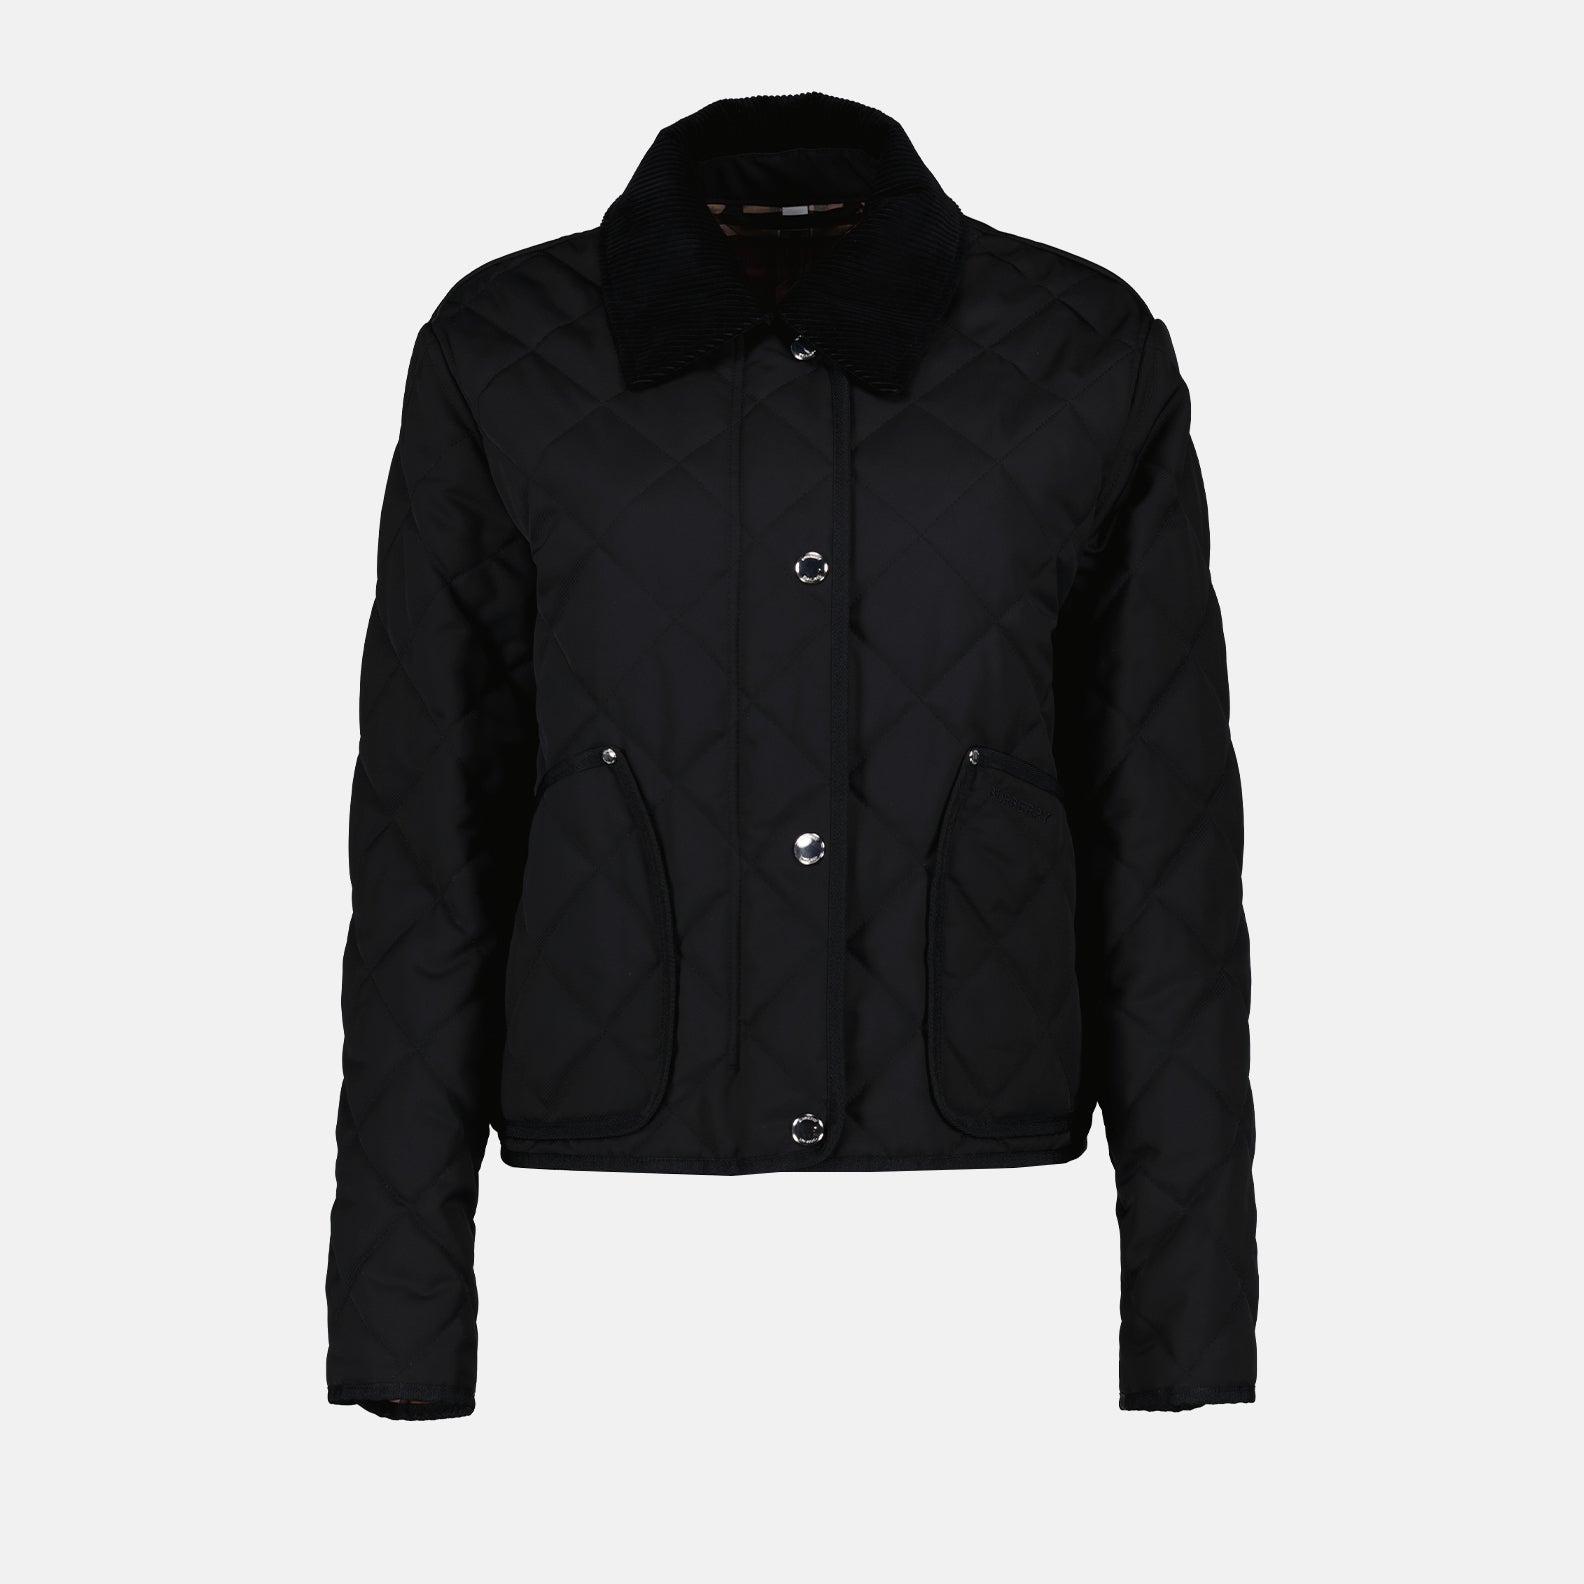 Lanford quilted jacket